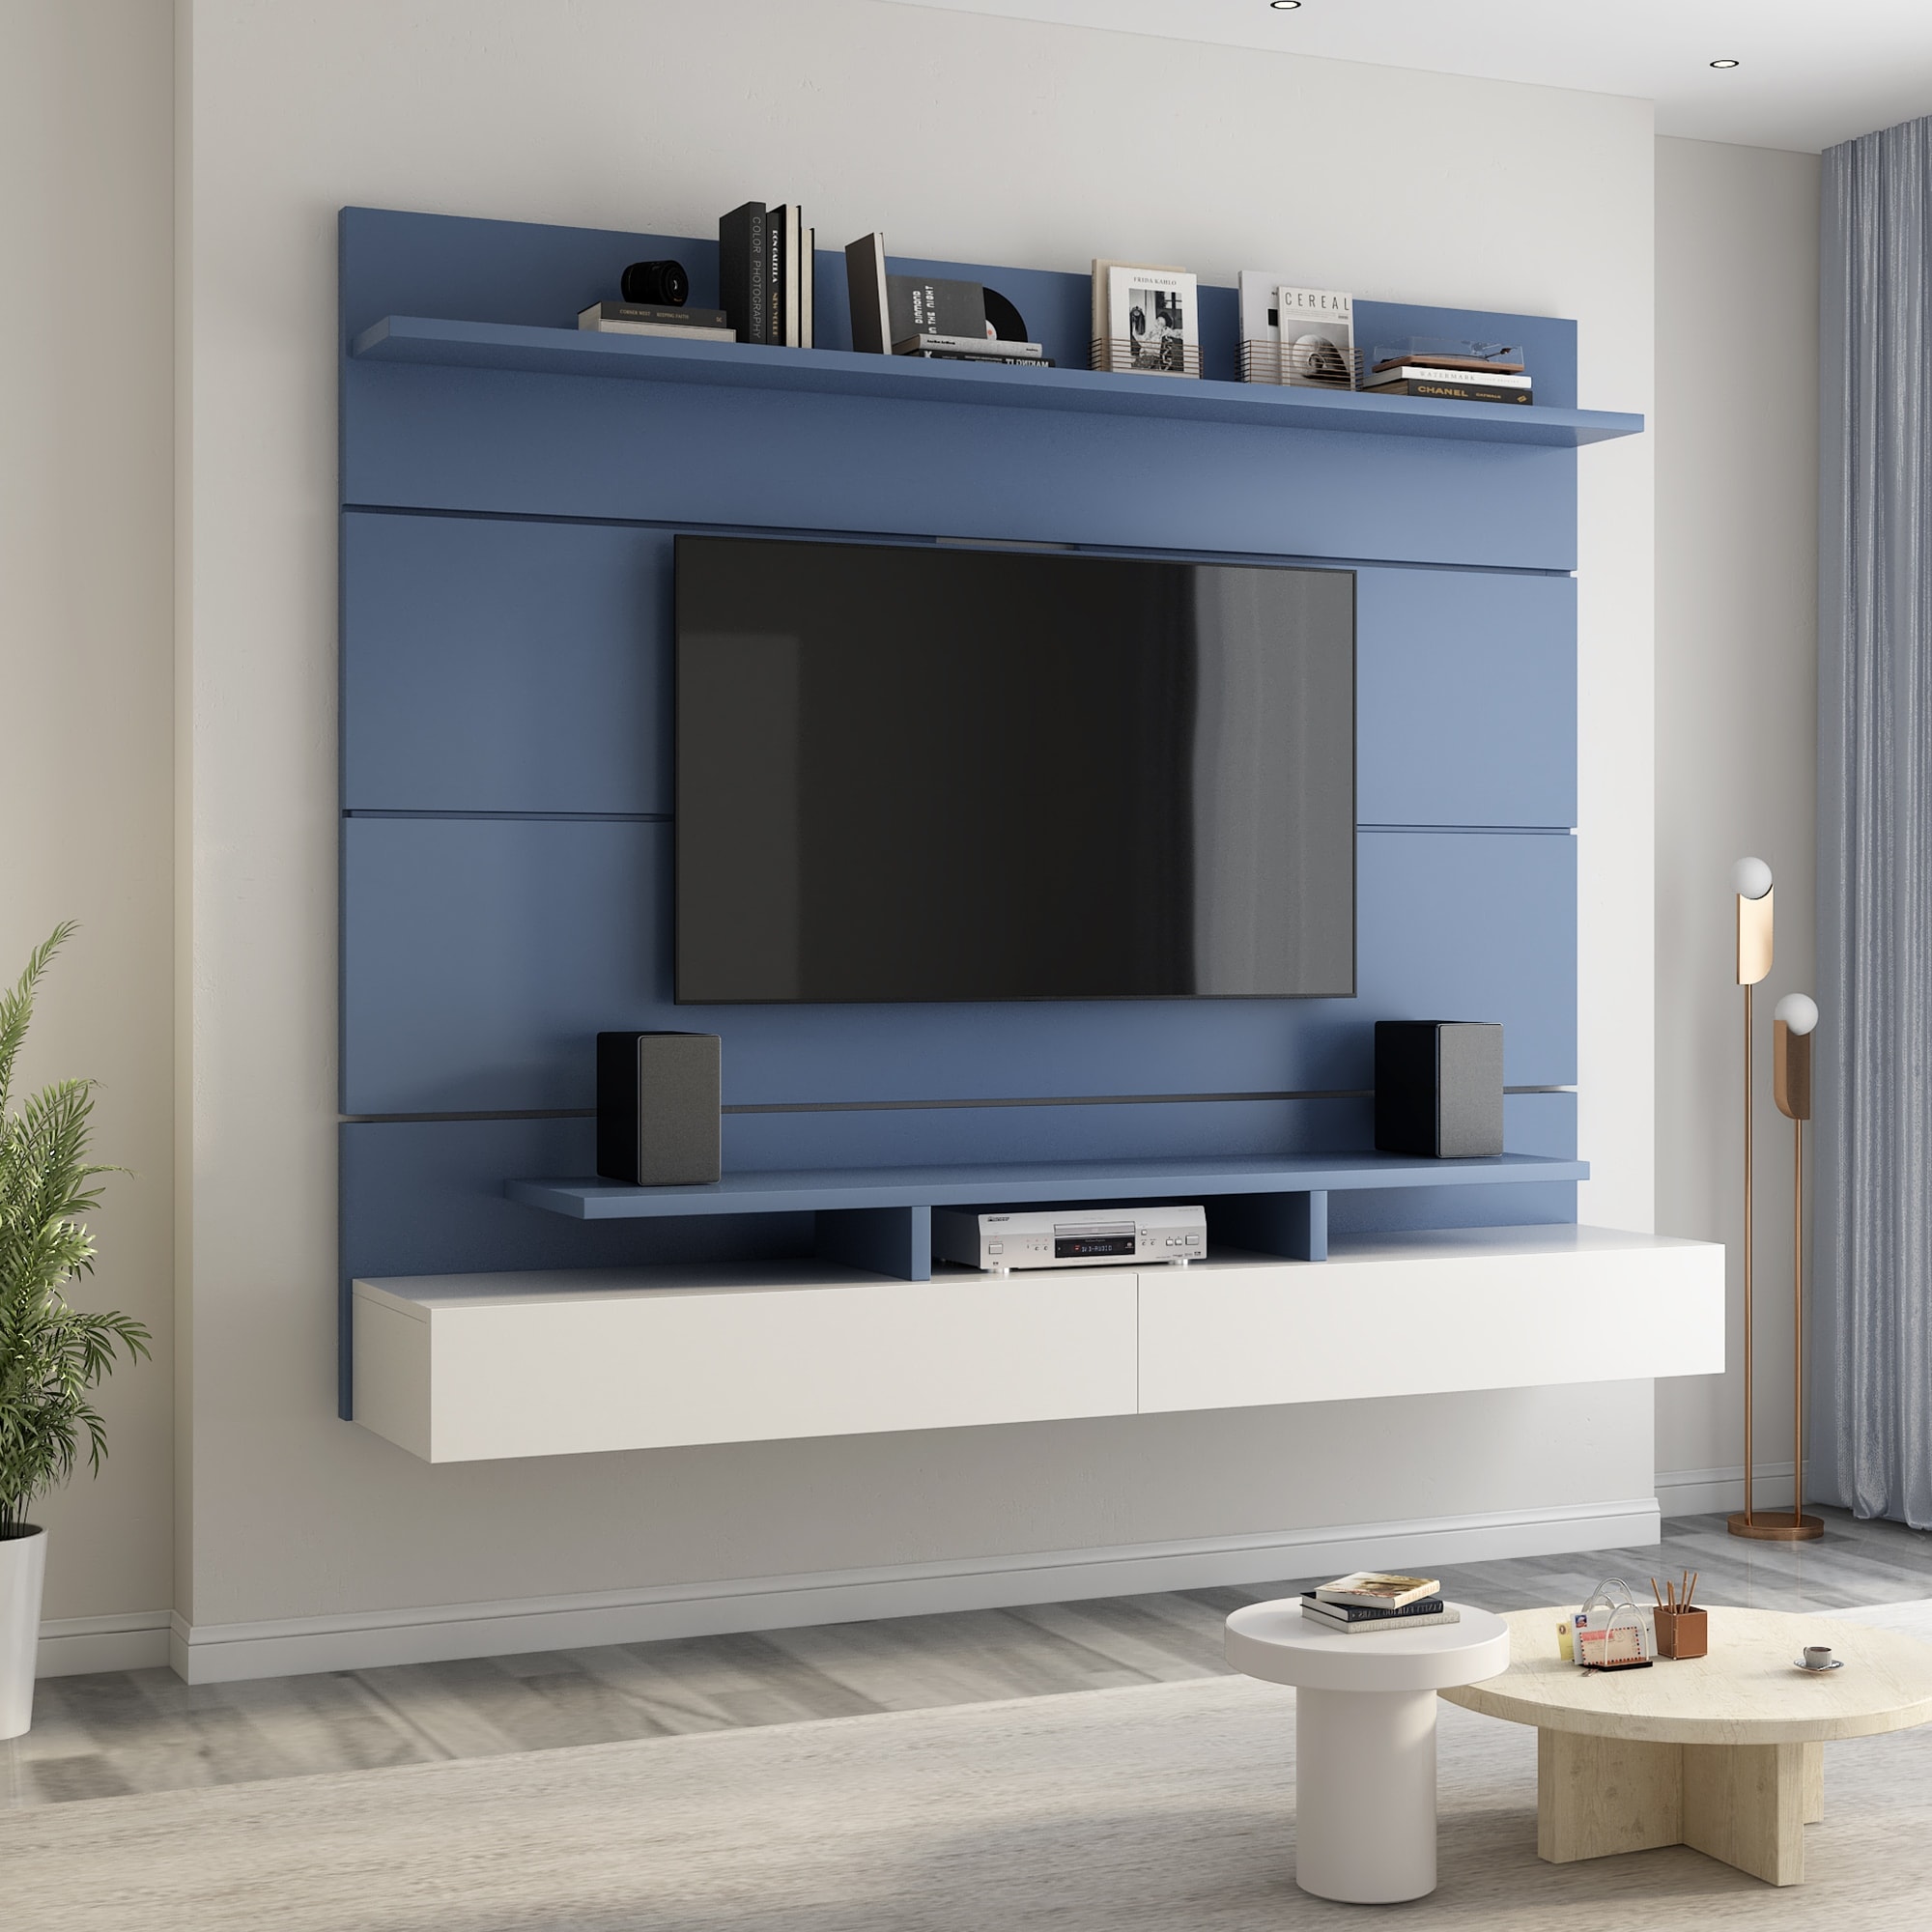 https://ak1.ostkcdn.com/images/products/is/images/direct/8a8521c7fc77278da5016c2d51426cc76272d7fc/Wall-Mounted-TV-Stand-with-Large-Storage-Space-for-TVs-Up-To-85%22%2C-Multi-Purpose-Cabinet%2C-Cable-Management%2C-and-Drop-Down-Doors.jpg